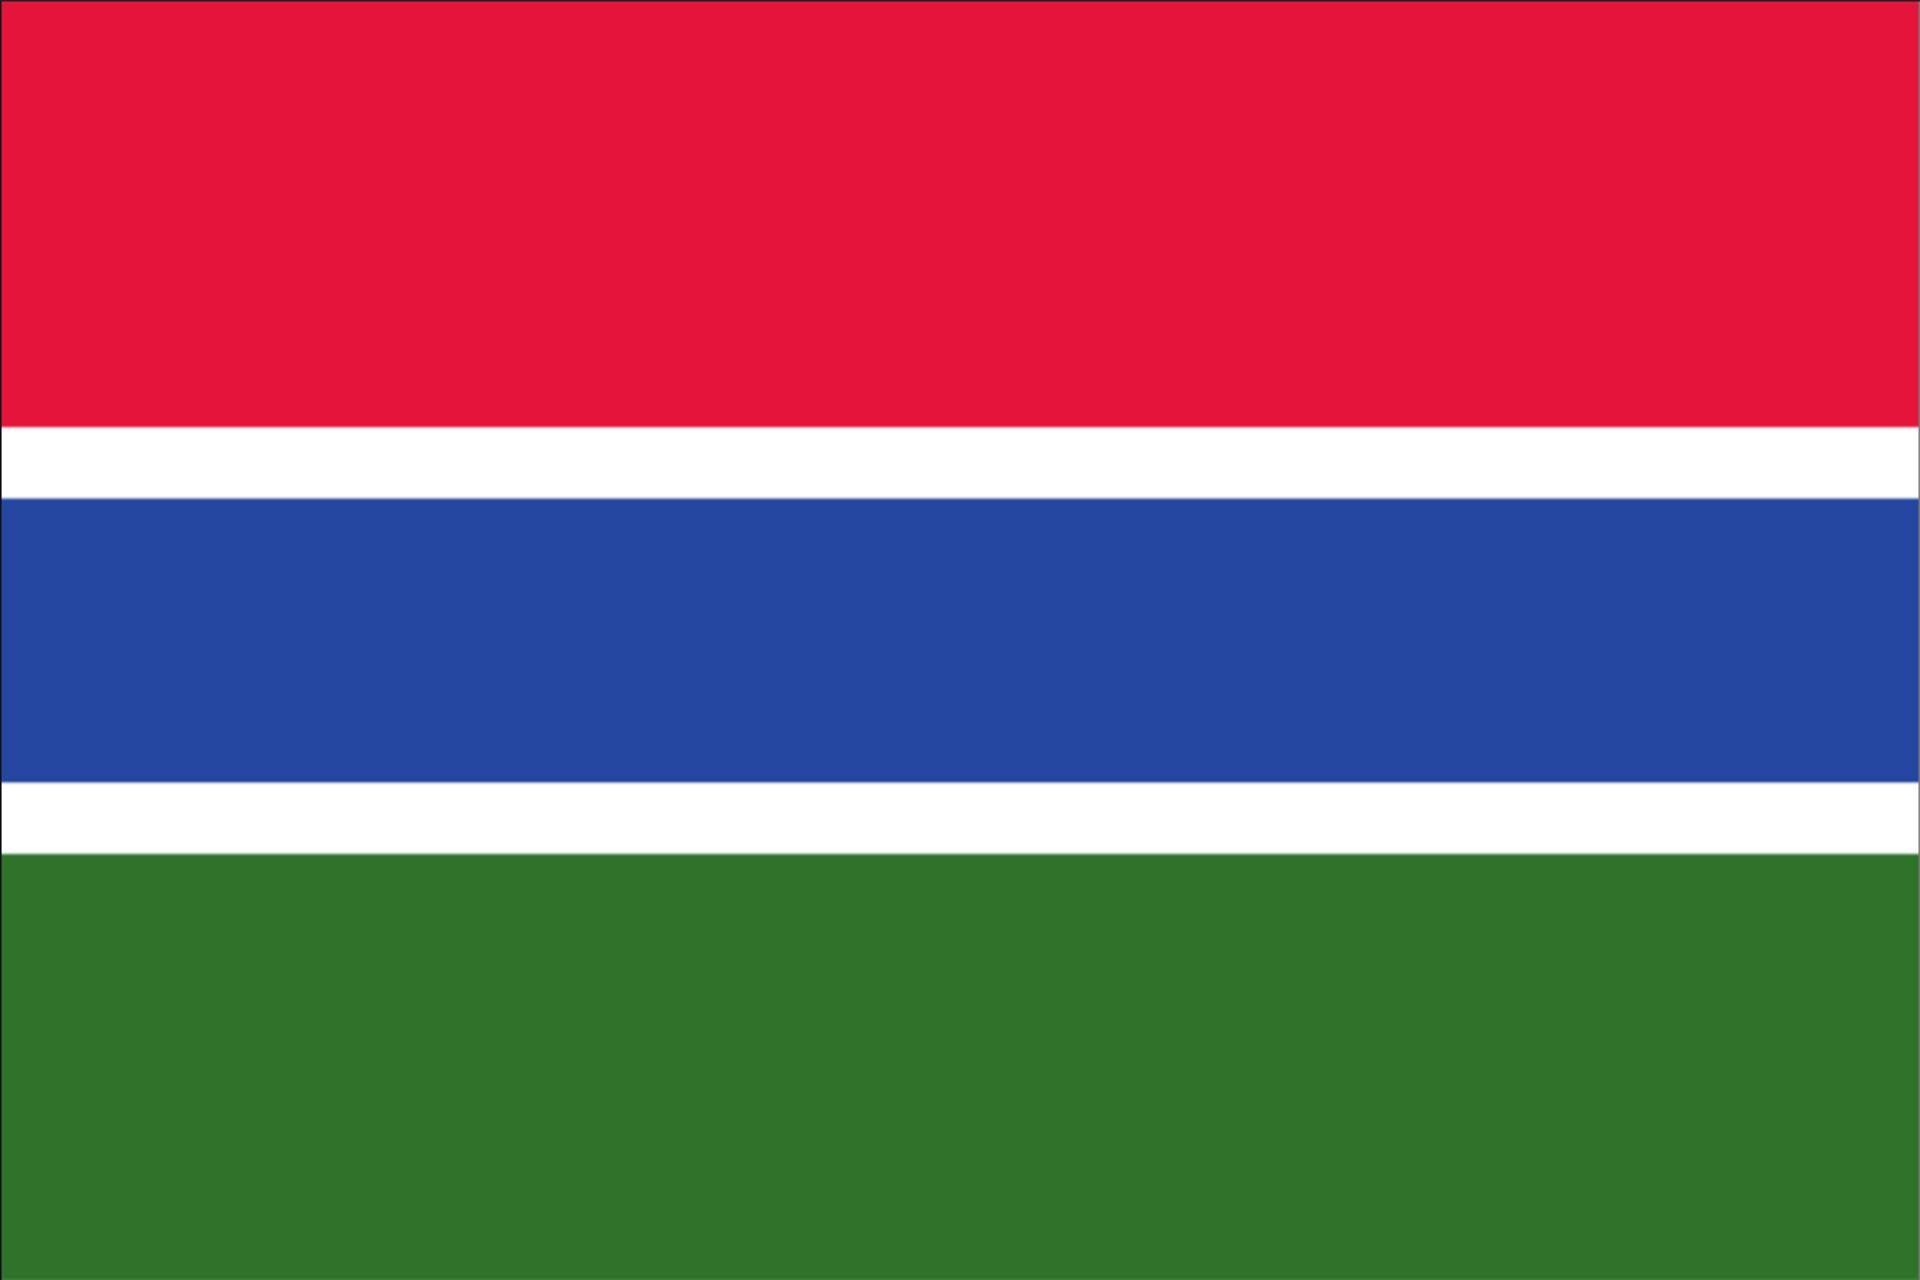 Flagge flaggenmeer Gambia g/m² 80